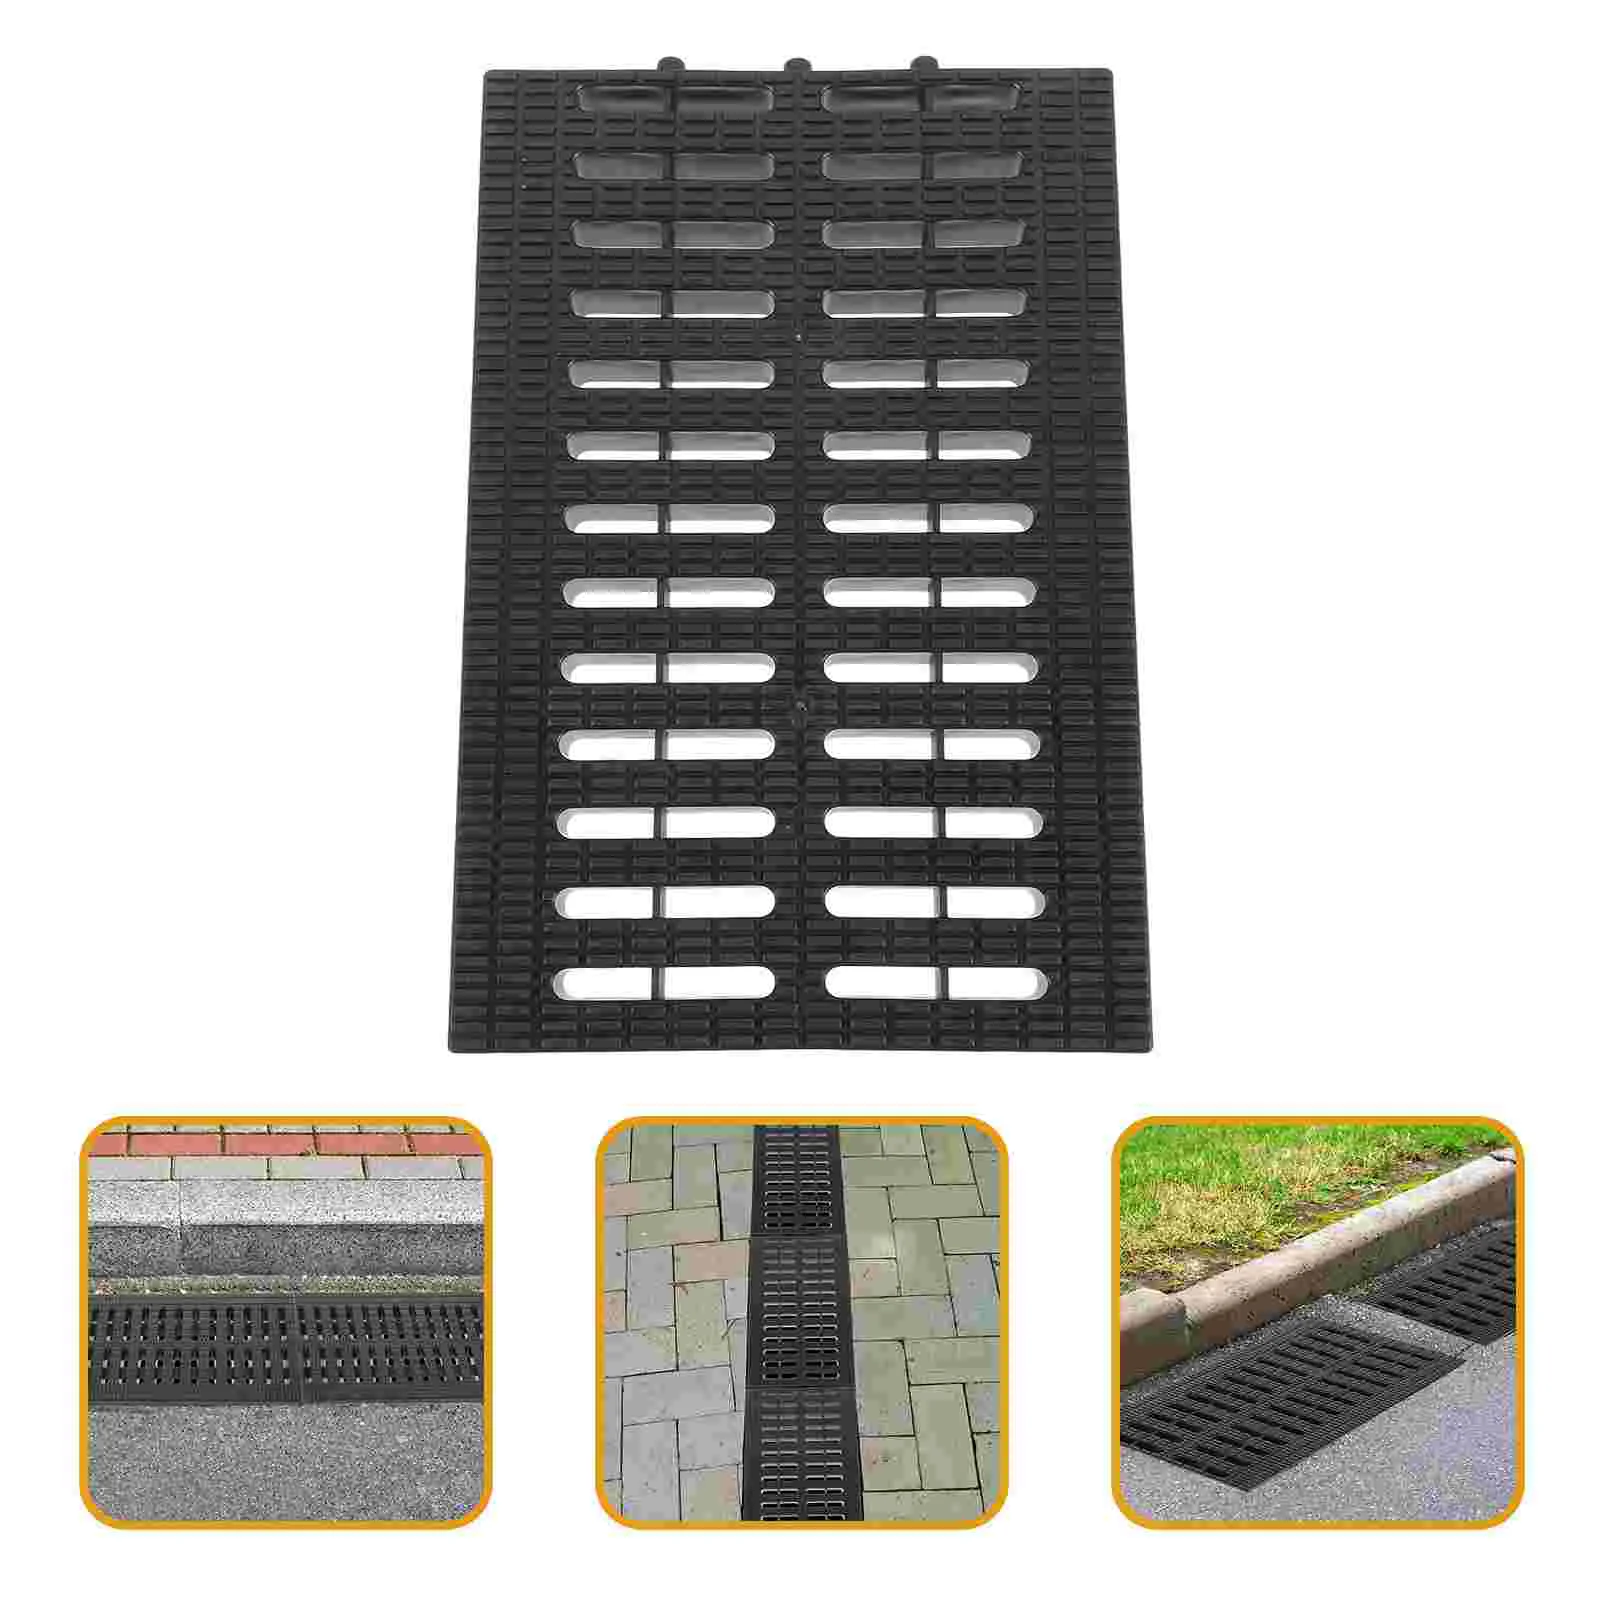 

Strainer Plastic Drainage Grate Kitchen Sewer Grate Cover Channel Grid Grate Bathroom Floor Drainage Linear Waste Drain